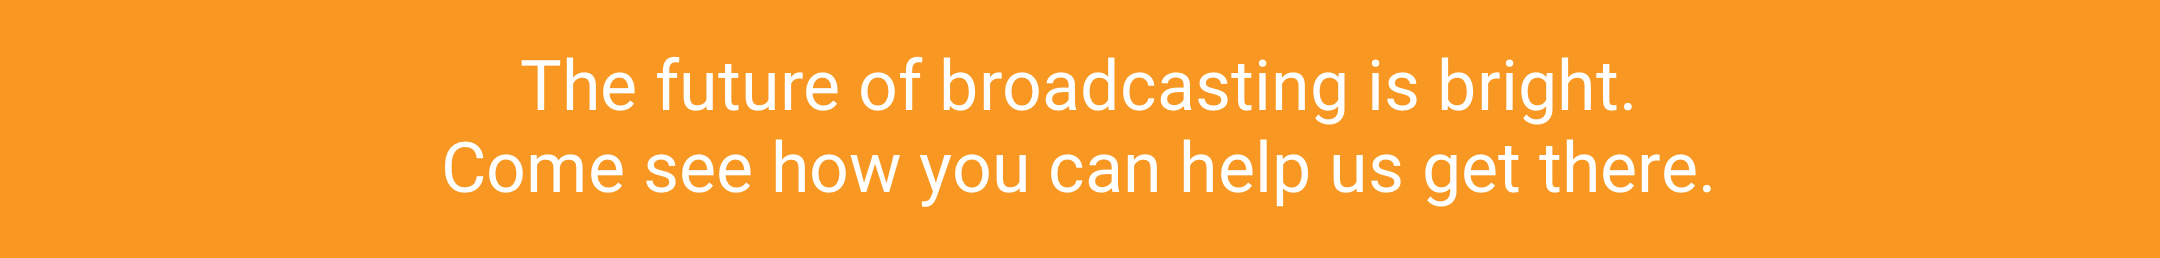 The future of broadcasting is bright. Come see how you can help us get there.